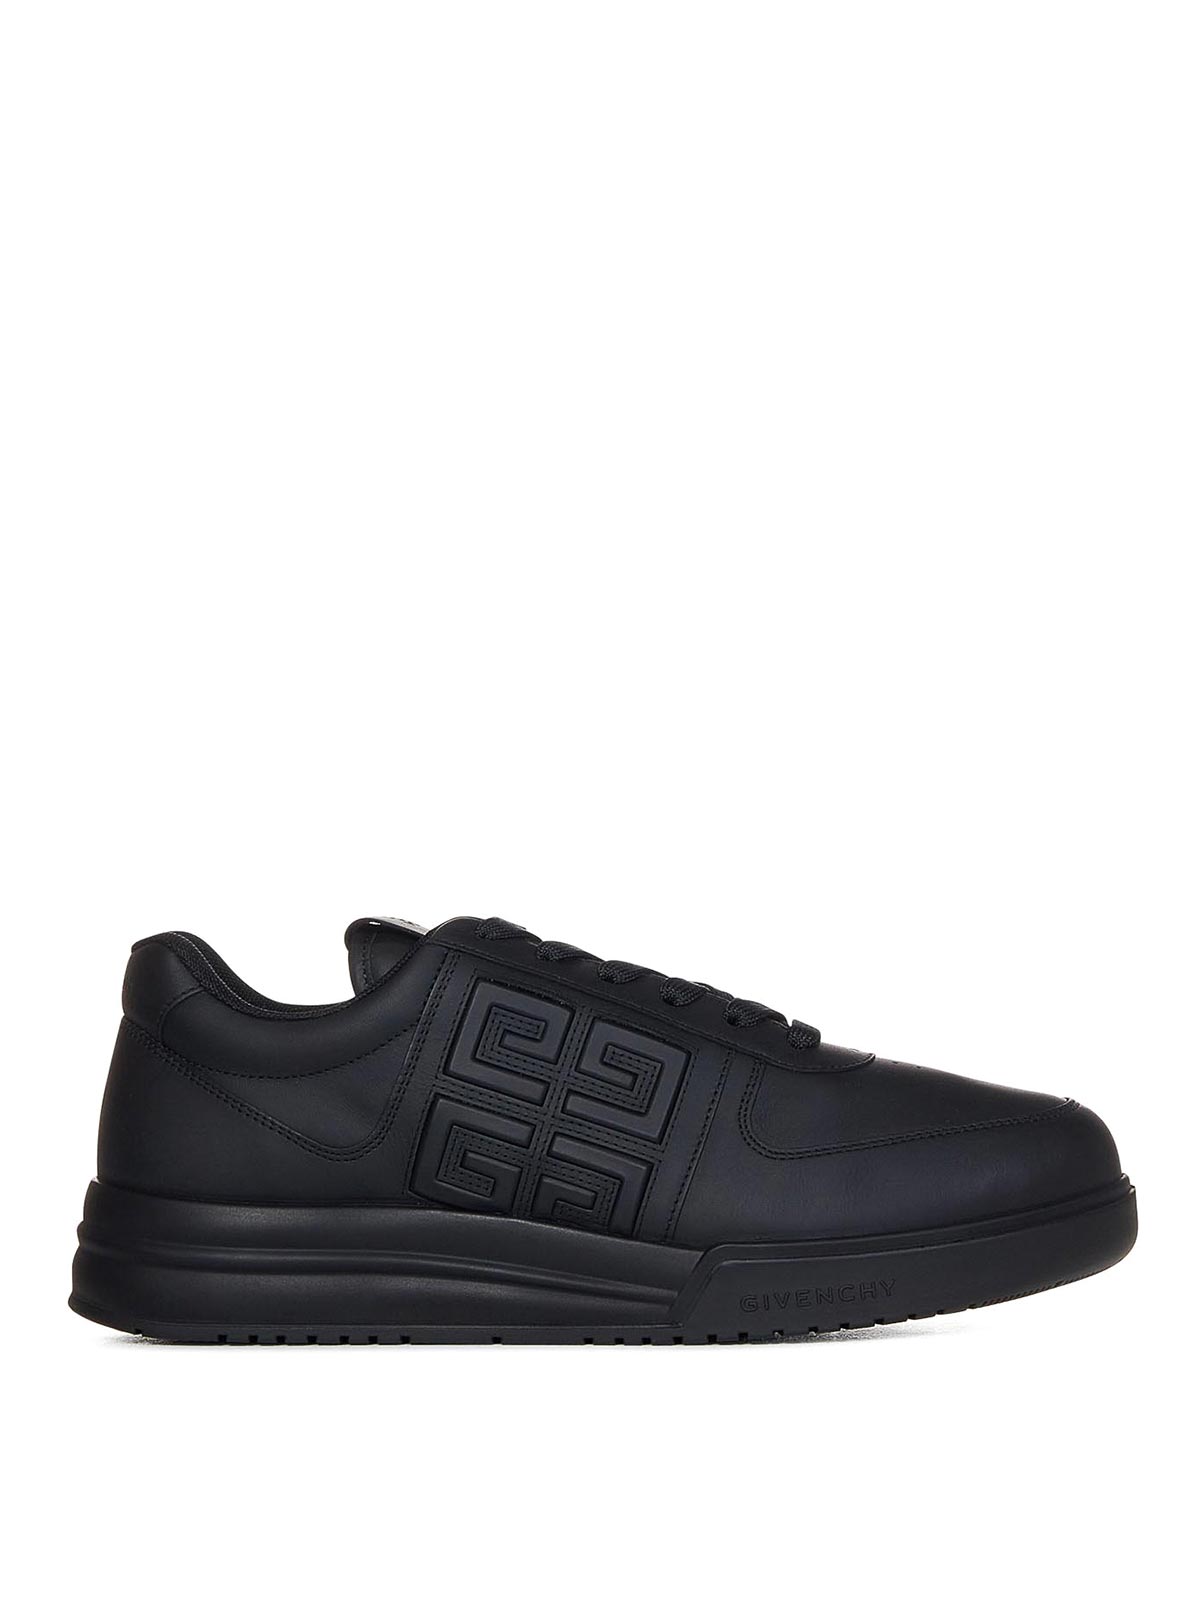 Shop Givenchy Black Calf Leather Low-top Sneakers